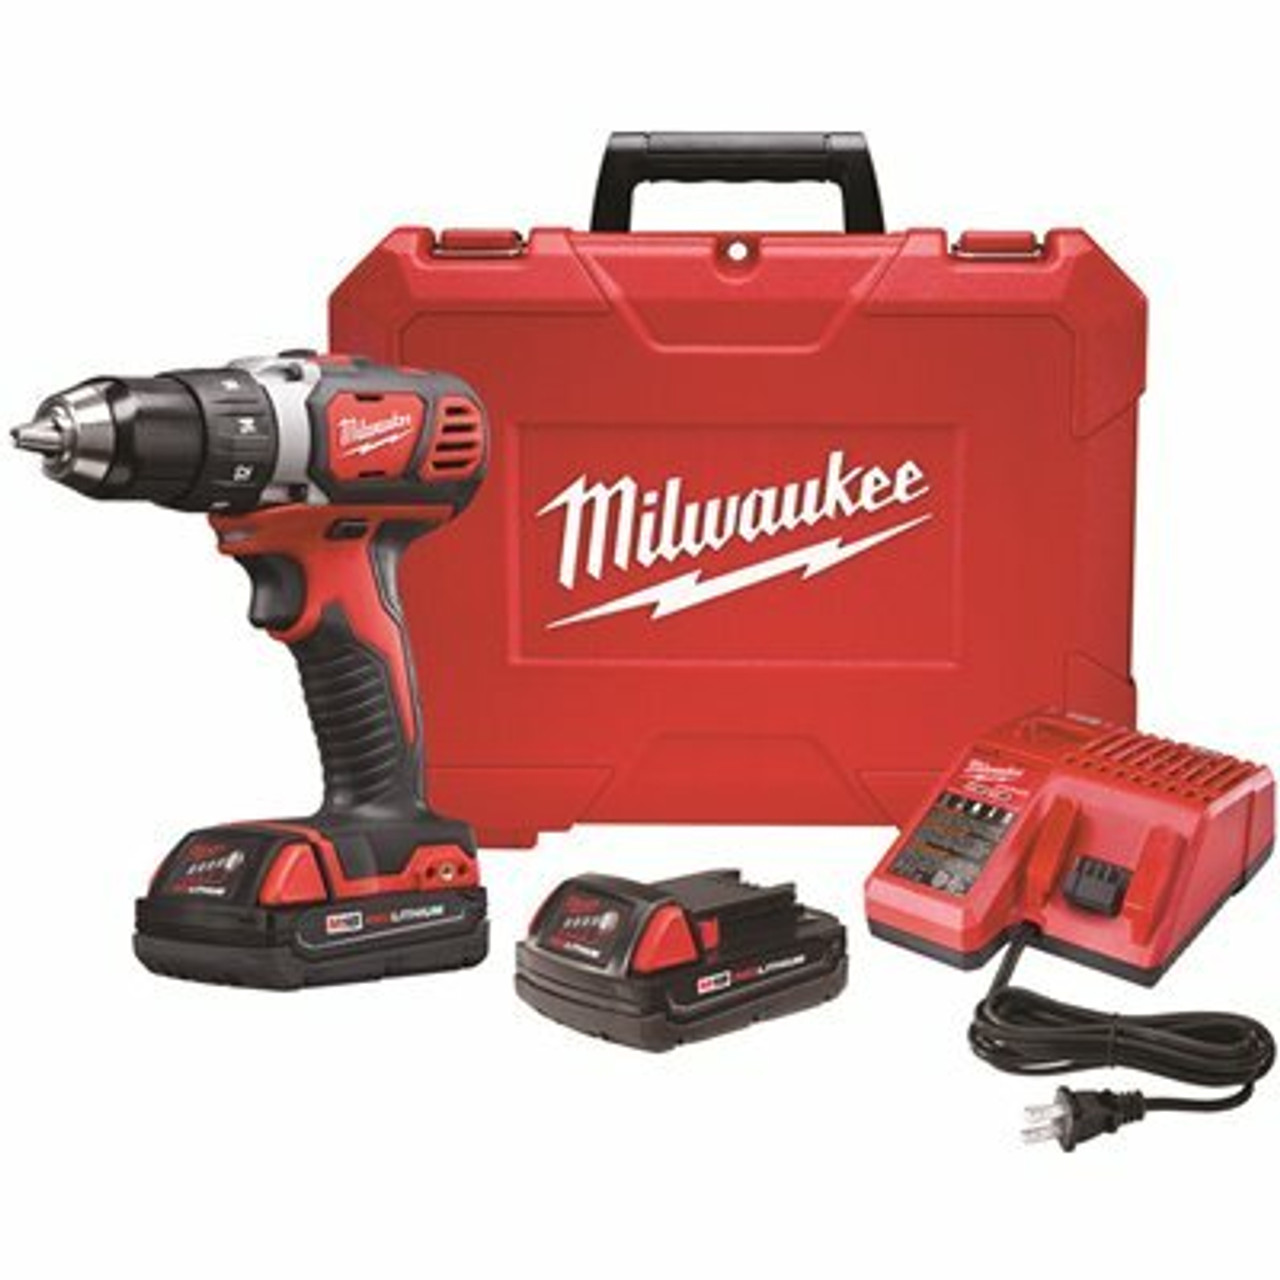 Milwaukee M18 18-Volt Lithium-Ion Cordless 1/2 In. Drill Driver Kit W/(2) 1.5Ah Batteries, Charger, Hard Case